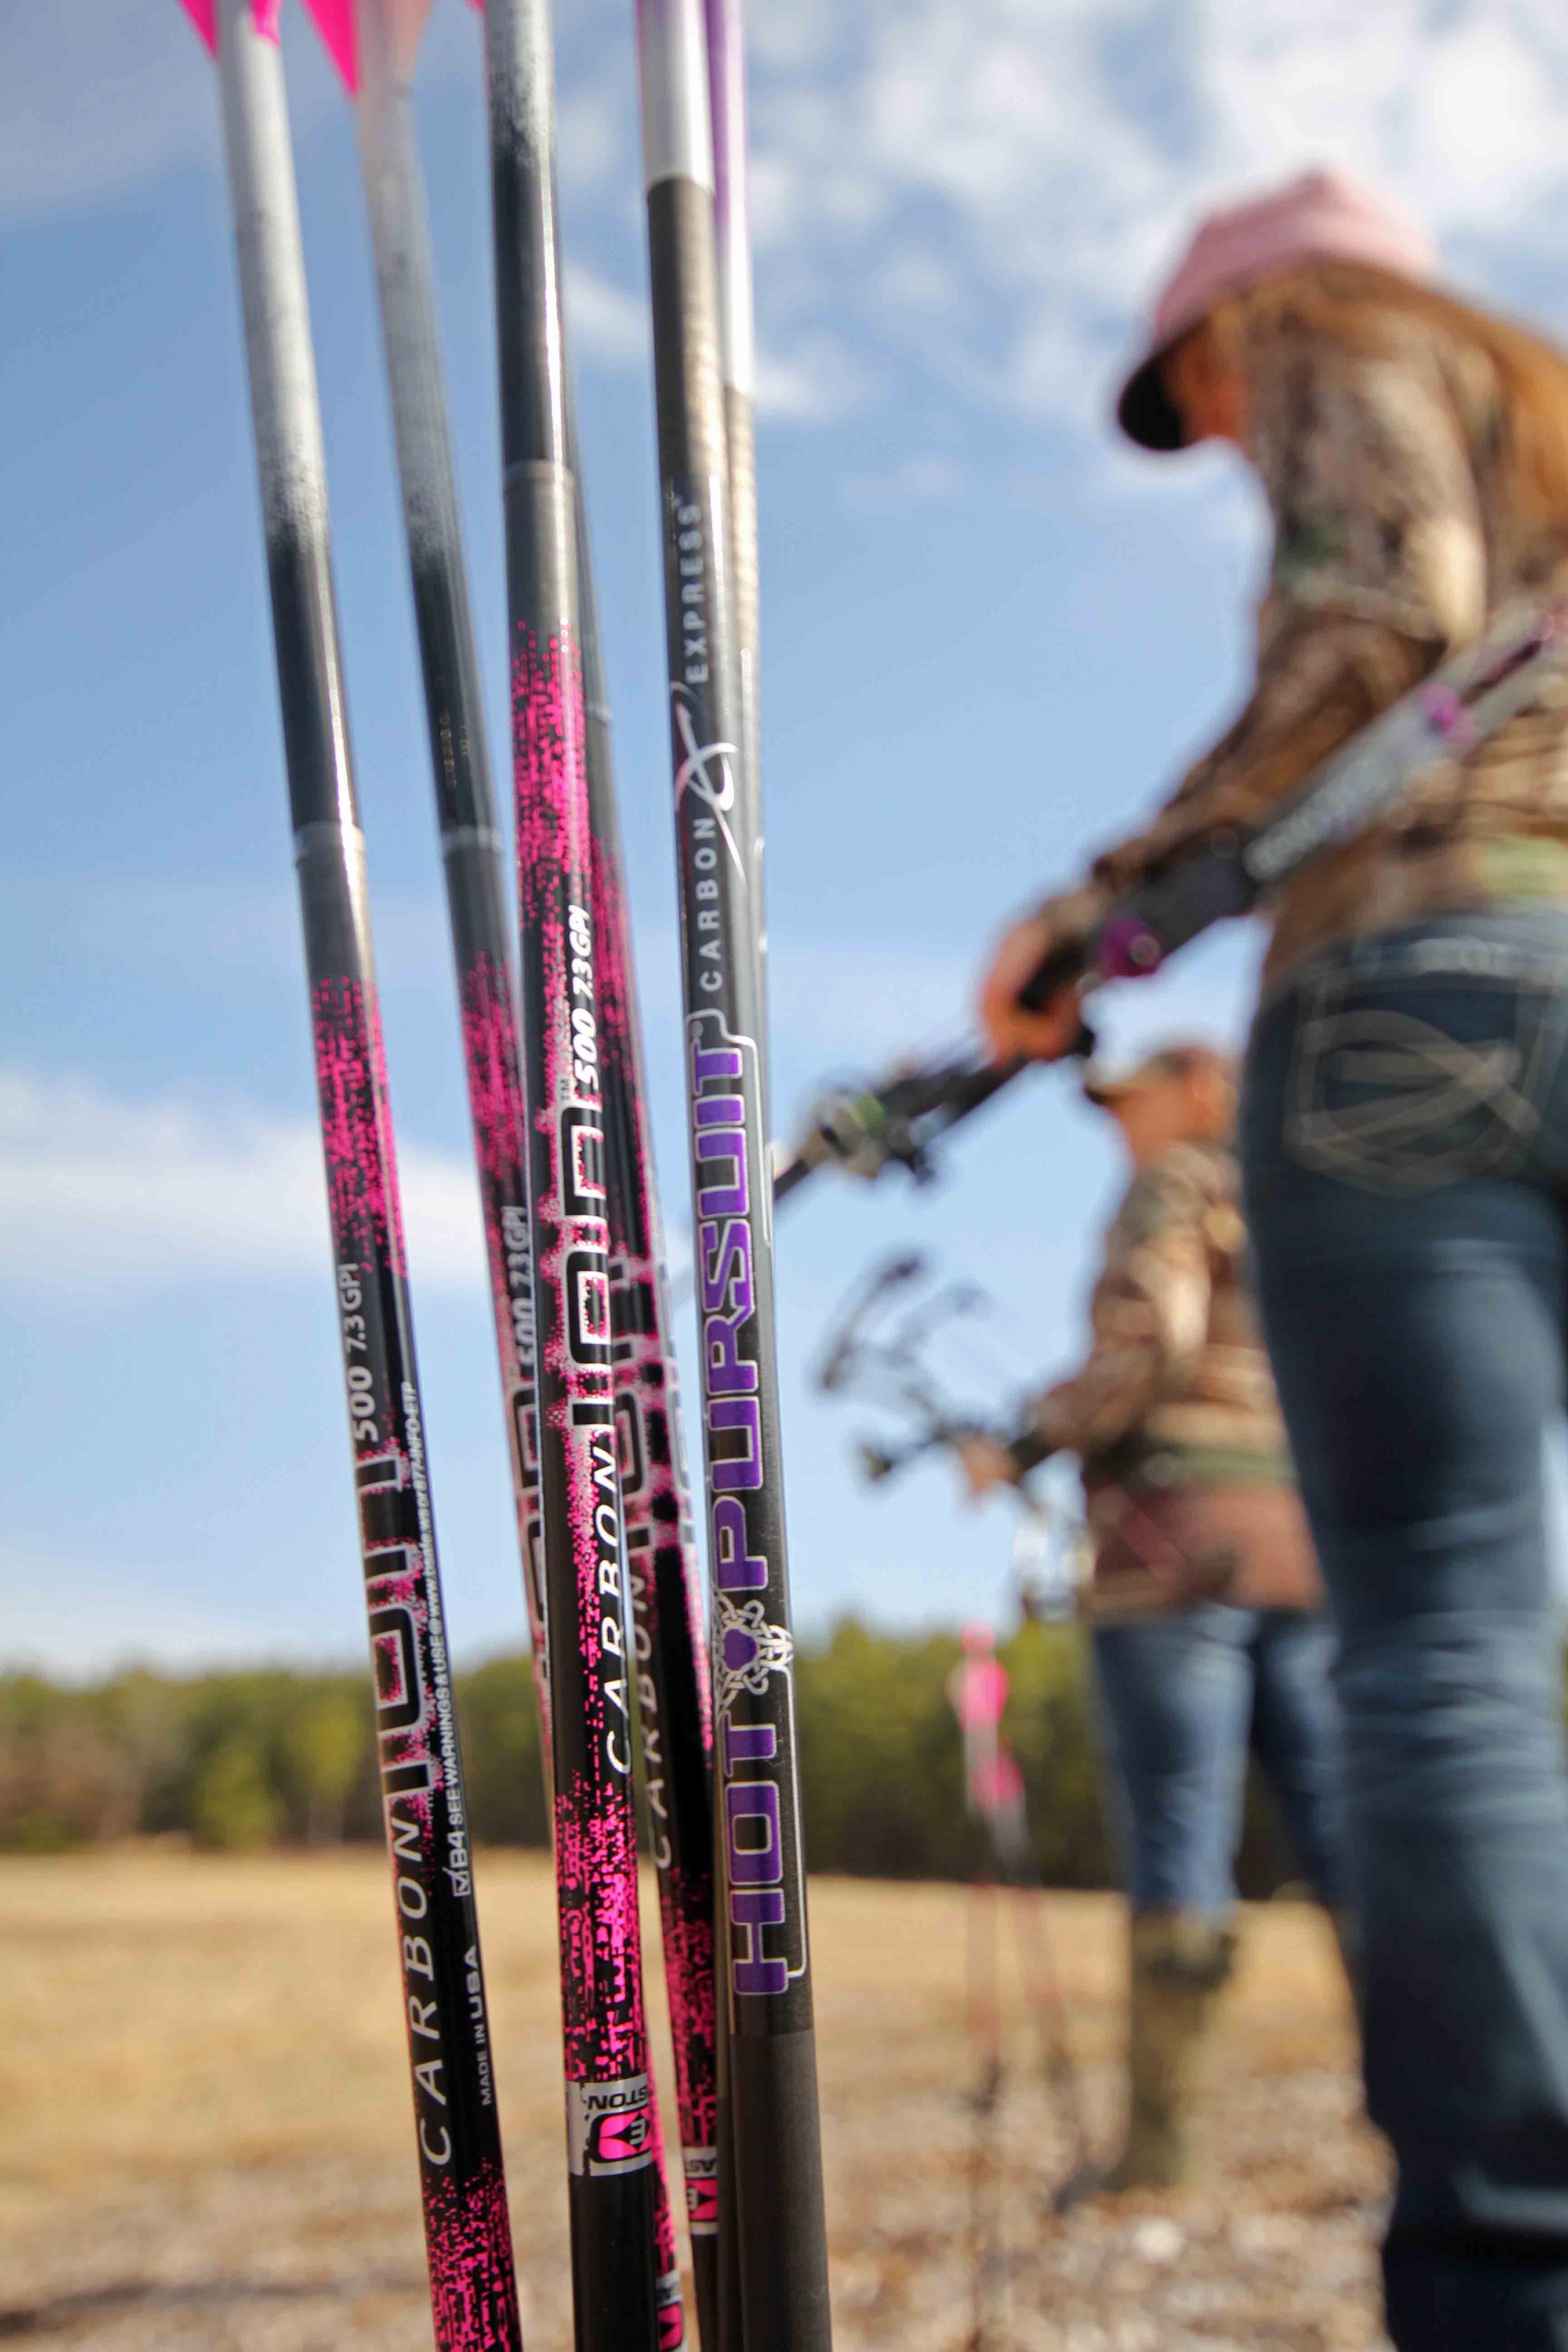 If you’re a female bowhunter, listen up: the bow companies get it. Not long ago, finding a bow with a draw length and weight